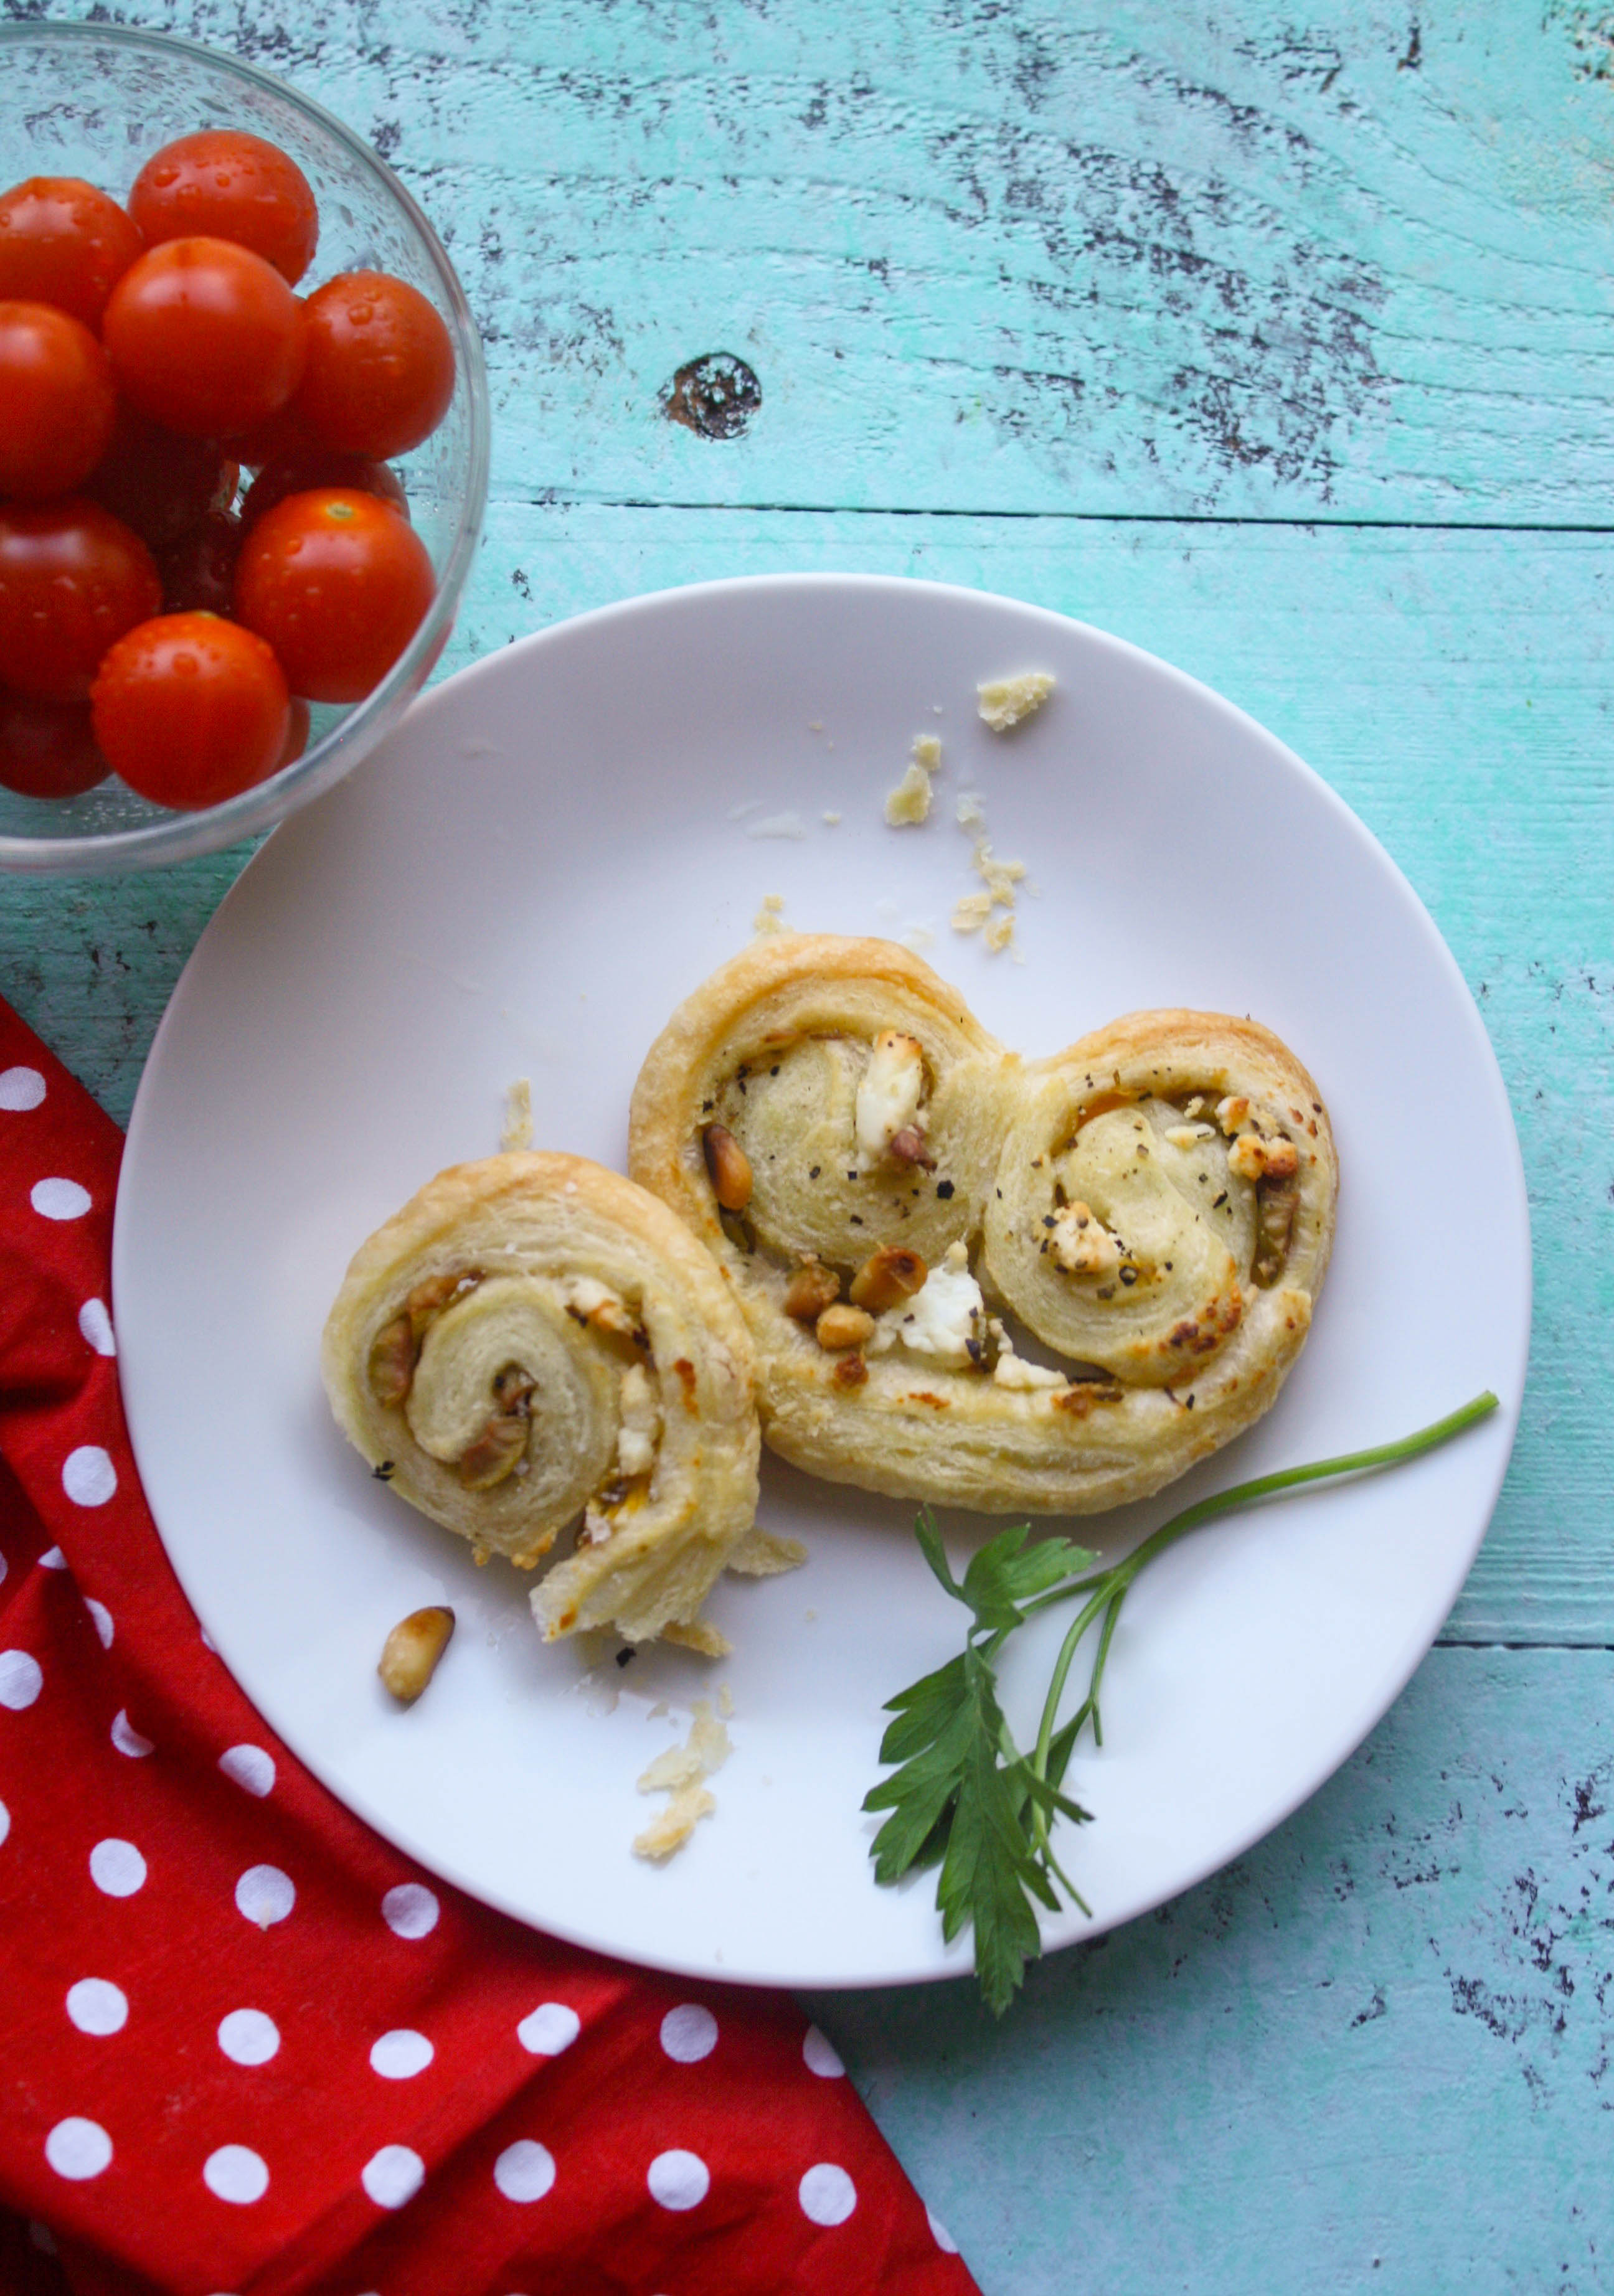 Savory Olive and Goat Cheese Palmiers are flaky and tasty! You'll love the goodies tucked inside. They make the perfect appetizer.